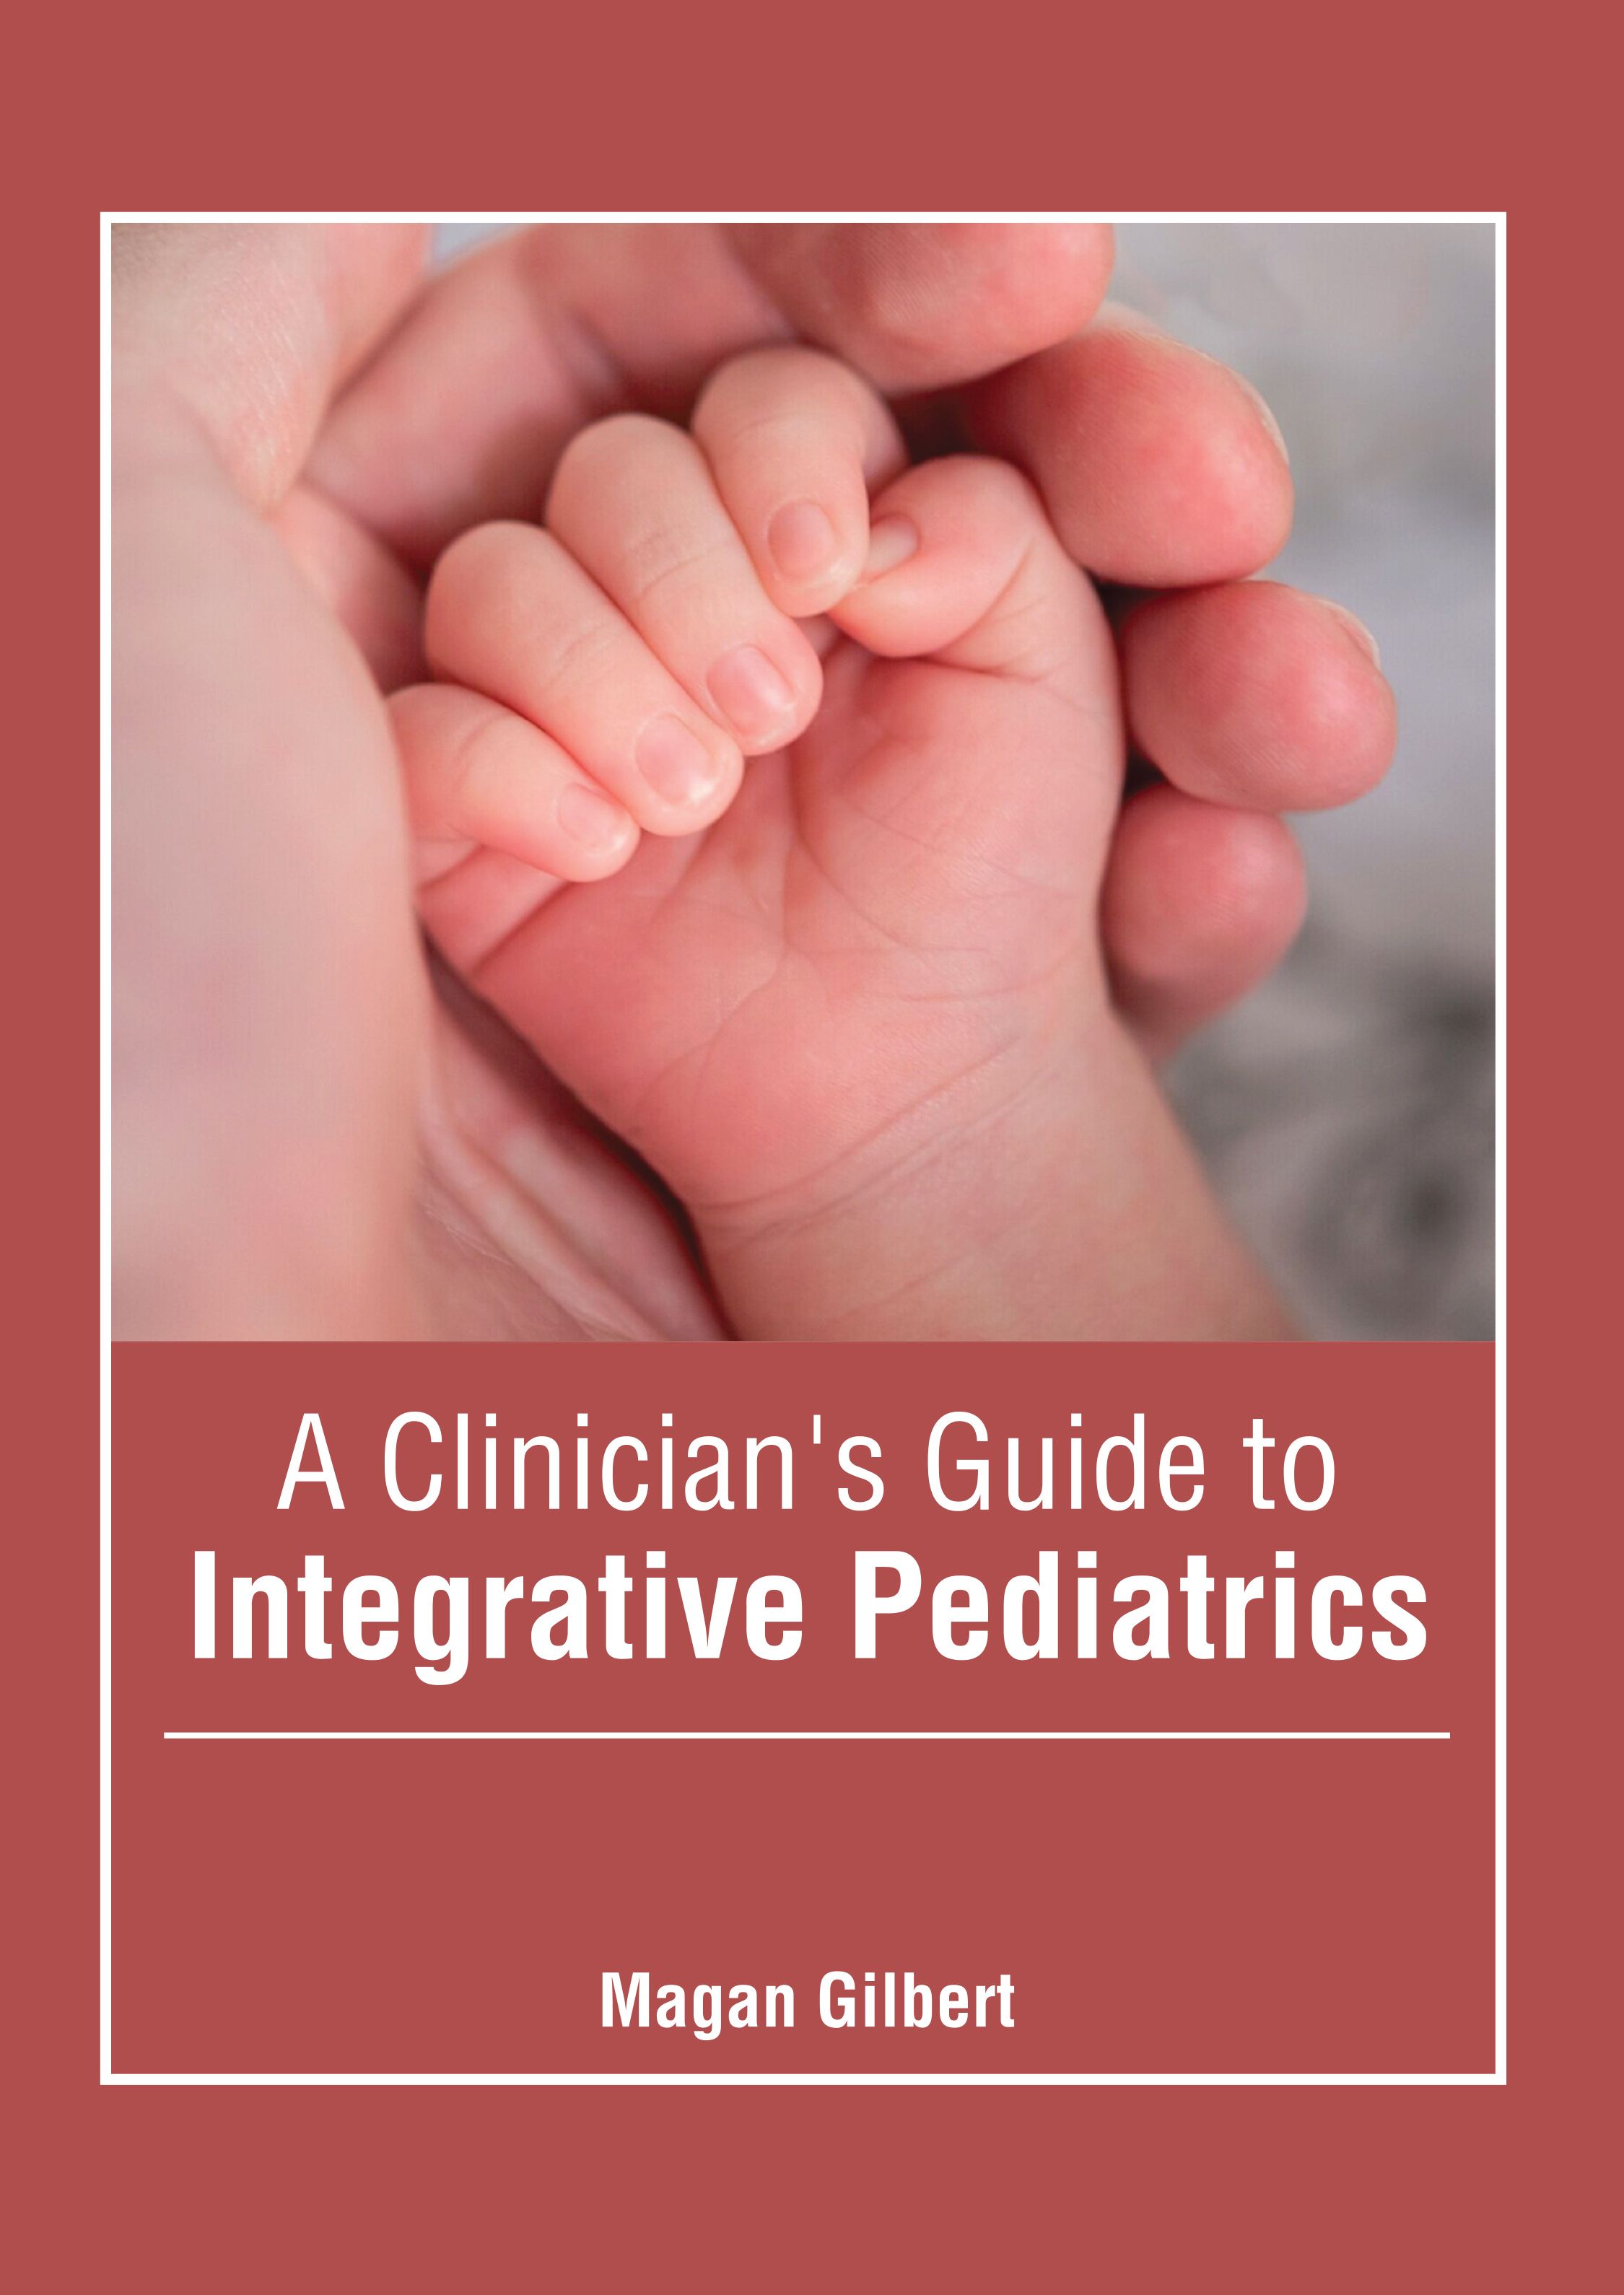 

exclusive-publishers/american-medical-publishers/a-clinician-s-guide-to-integrative-pediatrics-9781639278459